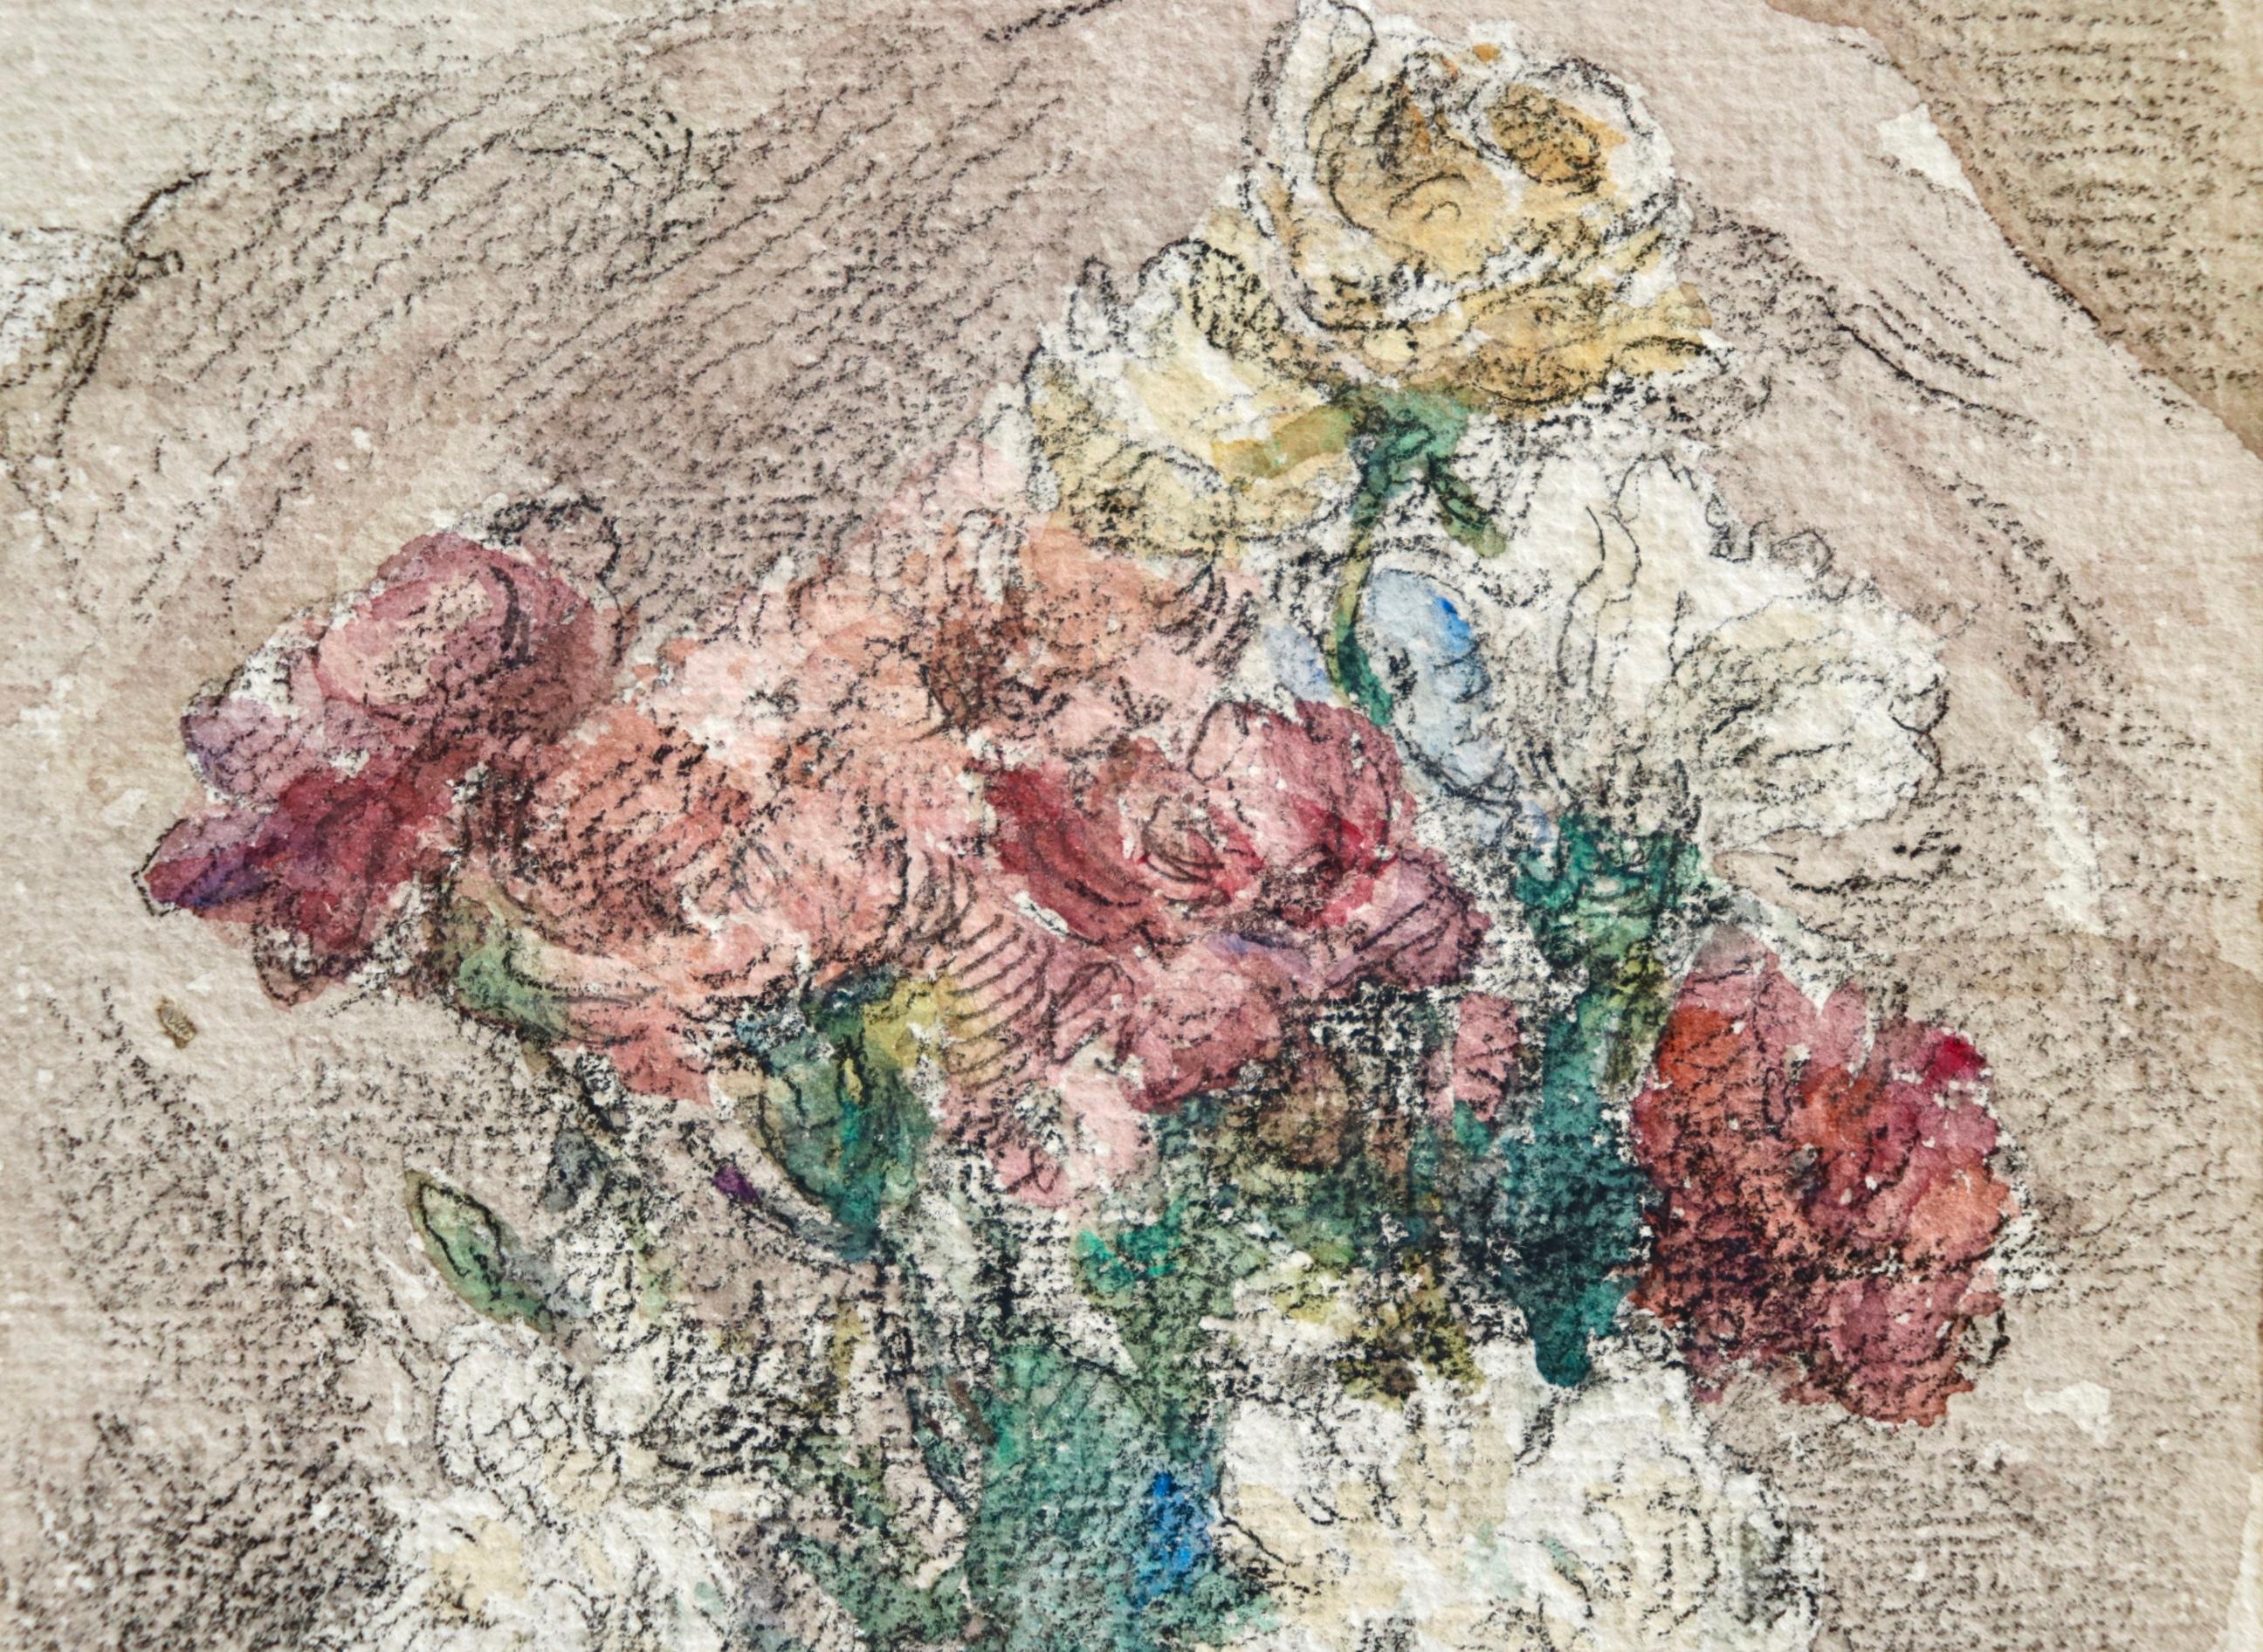 Watercolour on paper circa 1920 by French Impressionist painter Henri Duhem depicting white, red, pink and yellow flowers. Signed lower right. This painting is not currently framed but a suitable frame can be sourced if required.

Descendant of an